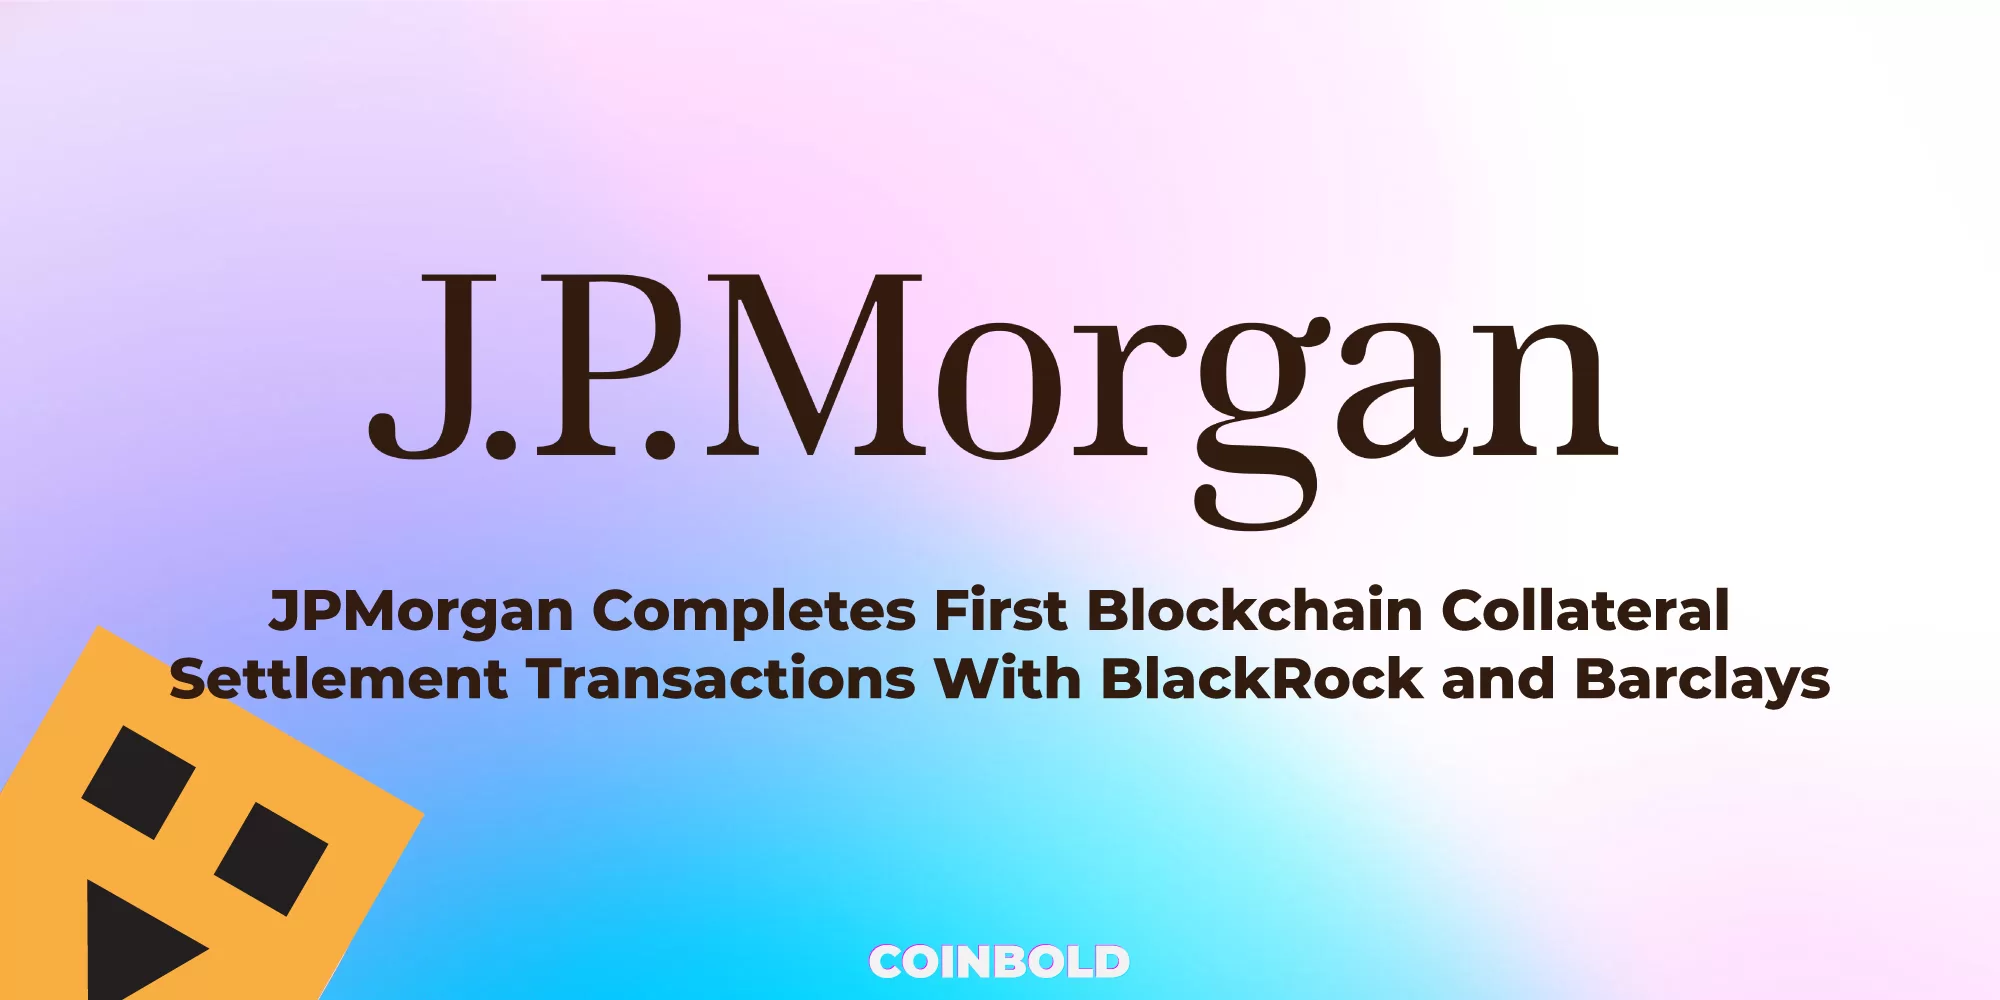 JPMorgan Completes First Blockchain Collateral Settlement Transactions With BlackRock and Barclays